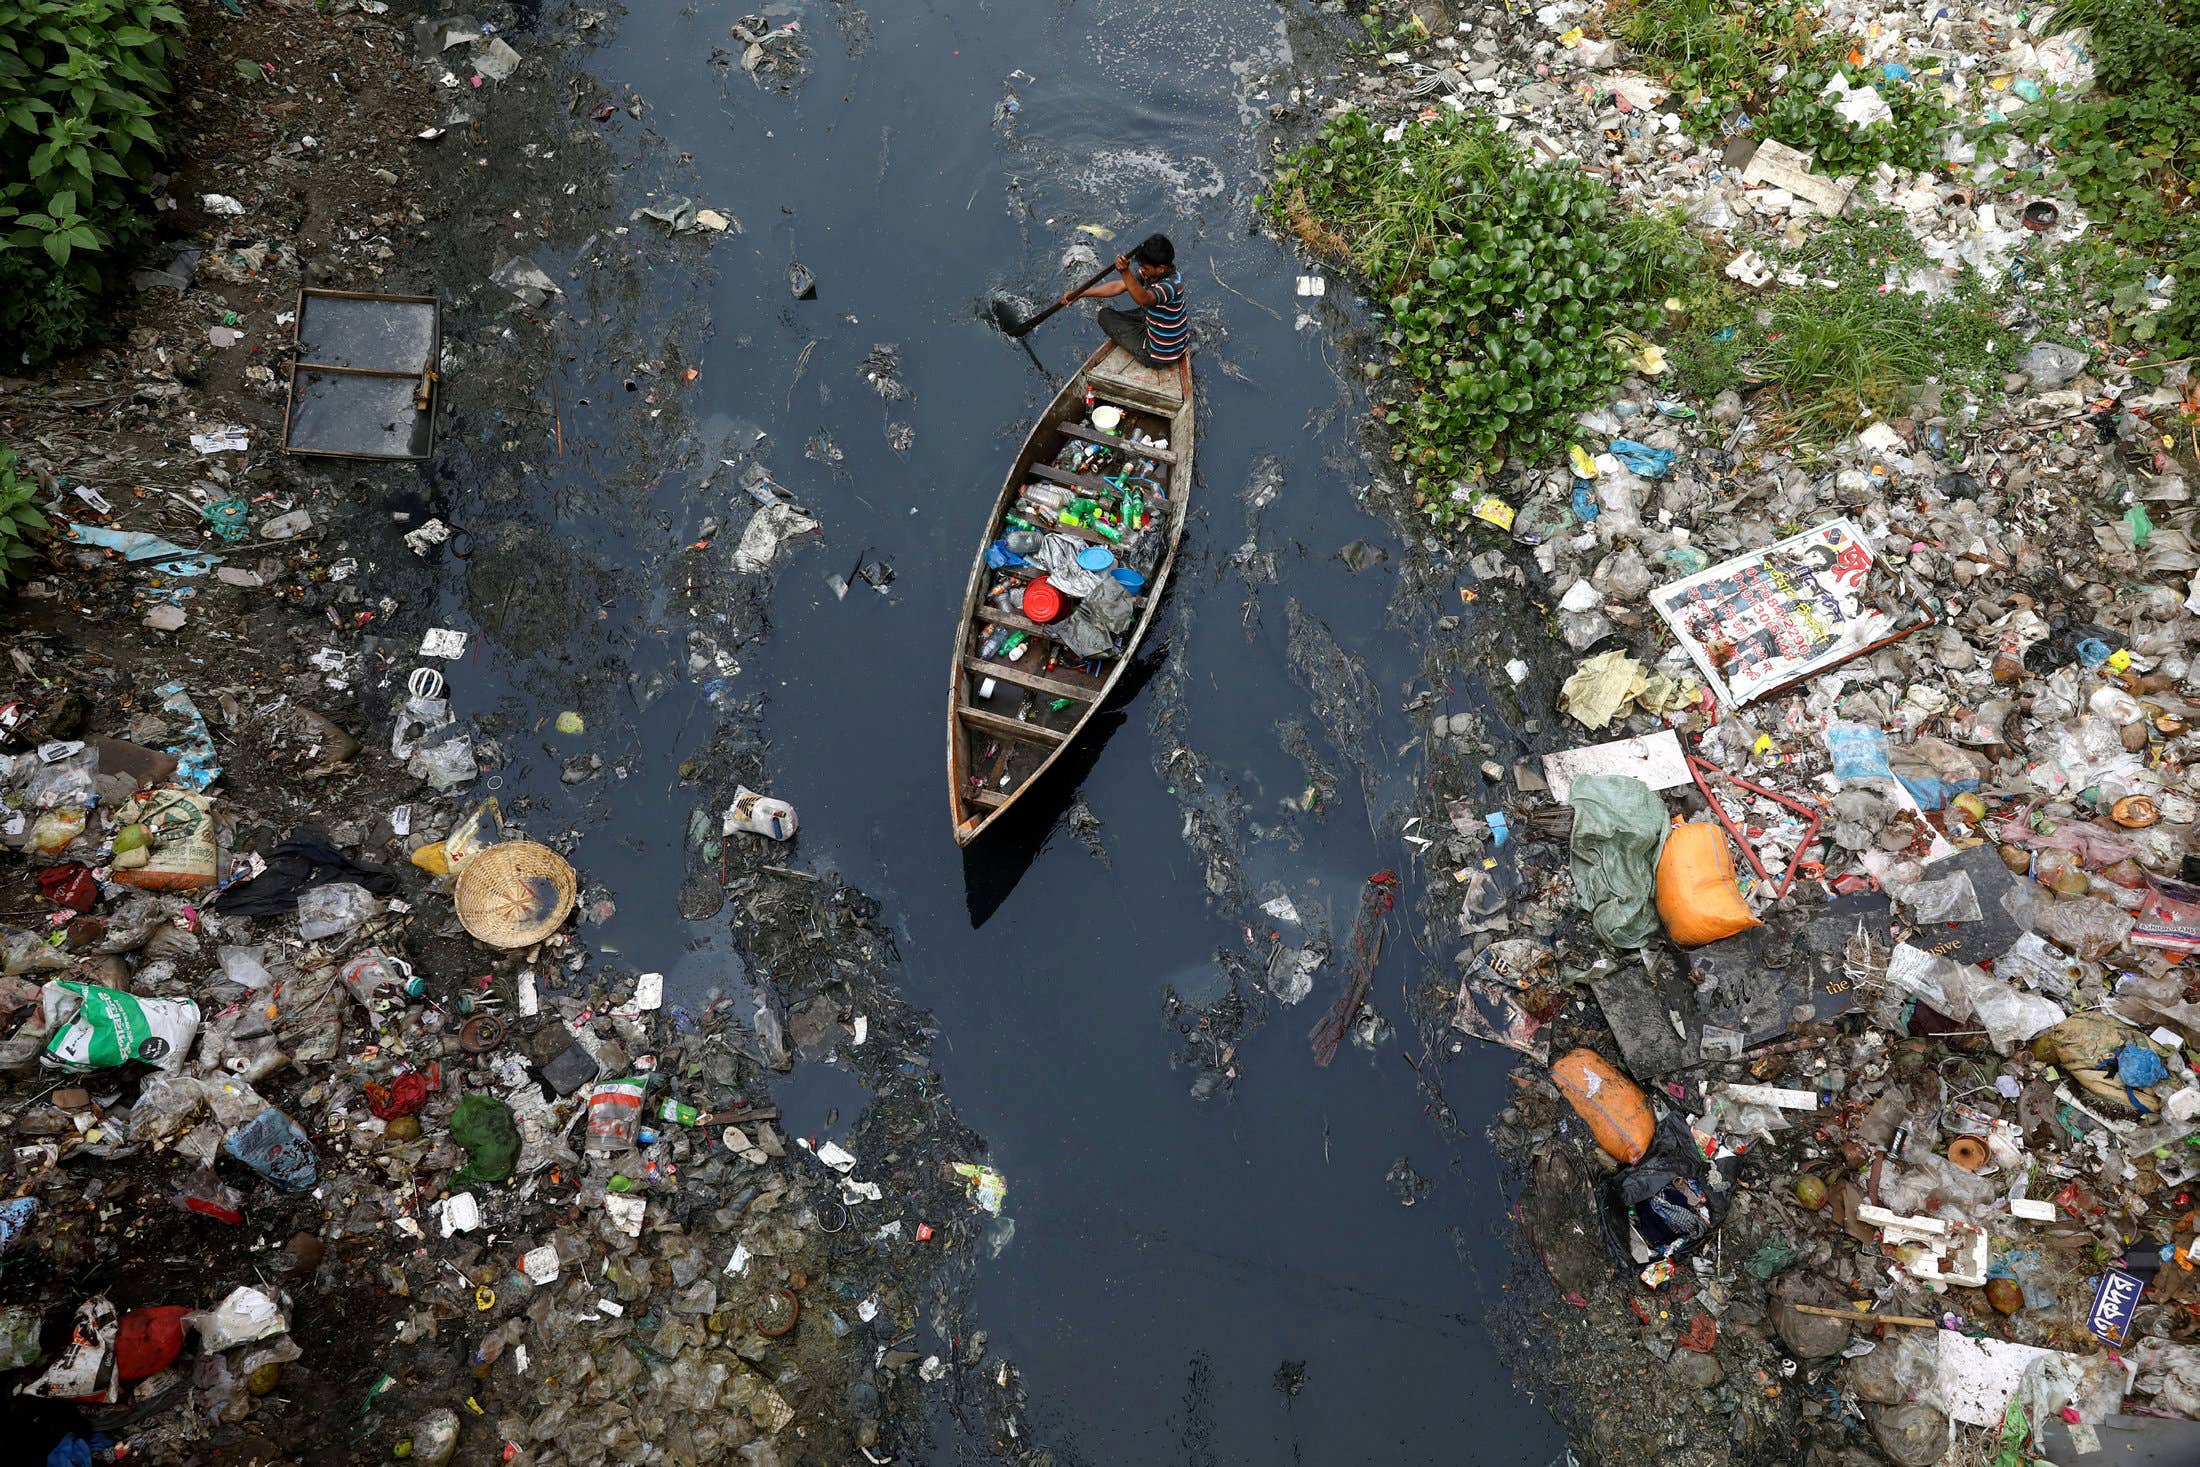 A boy collects plastic from a stream in Dhaka, Bangladesh